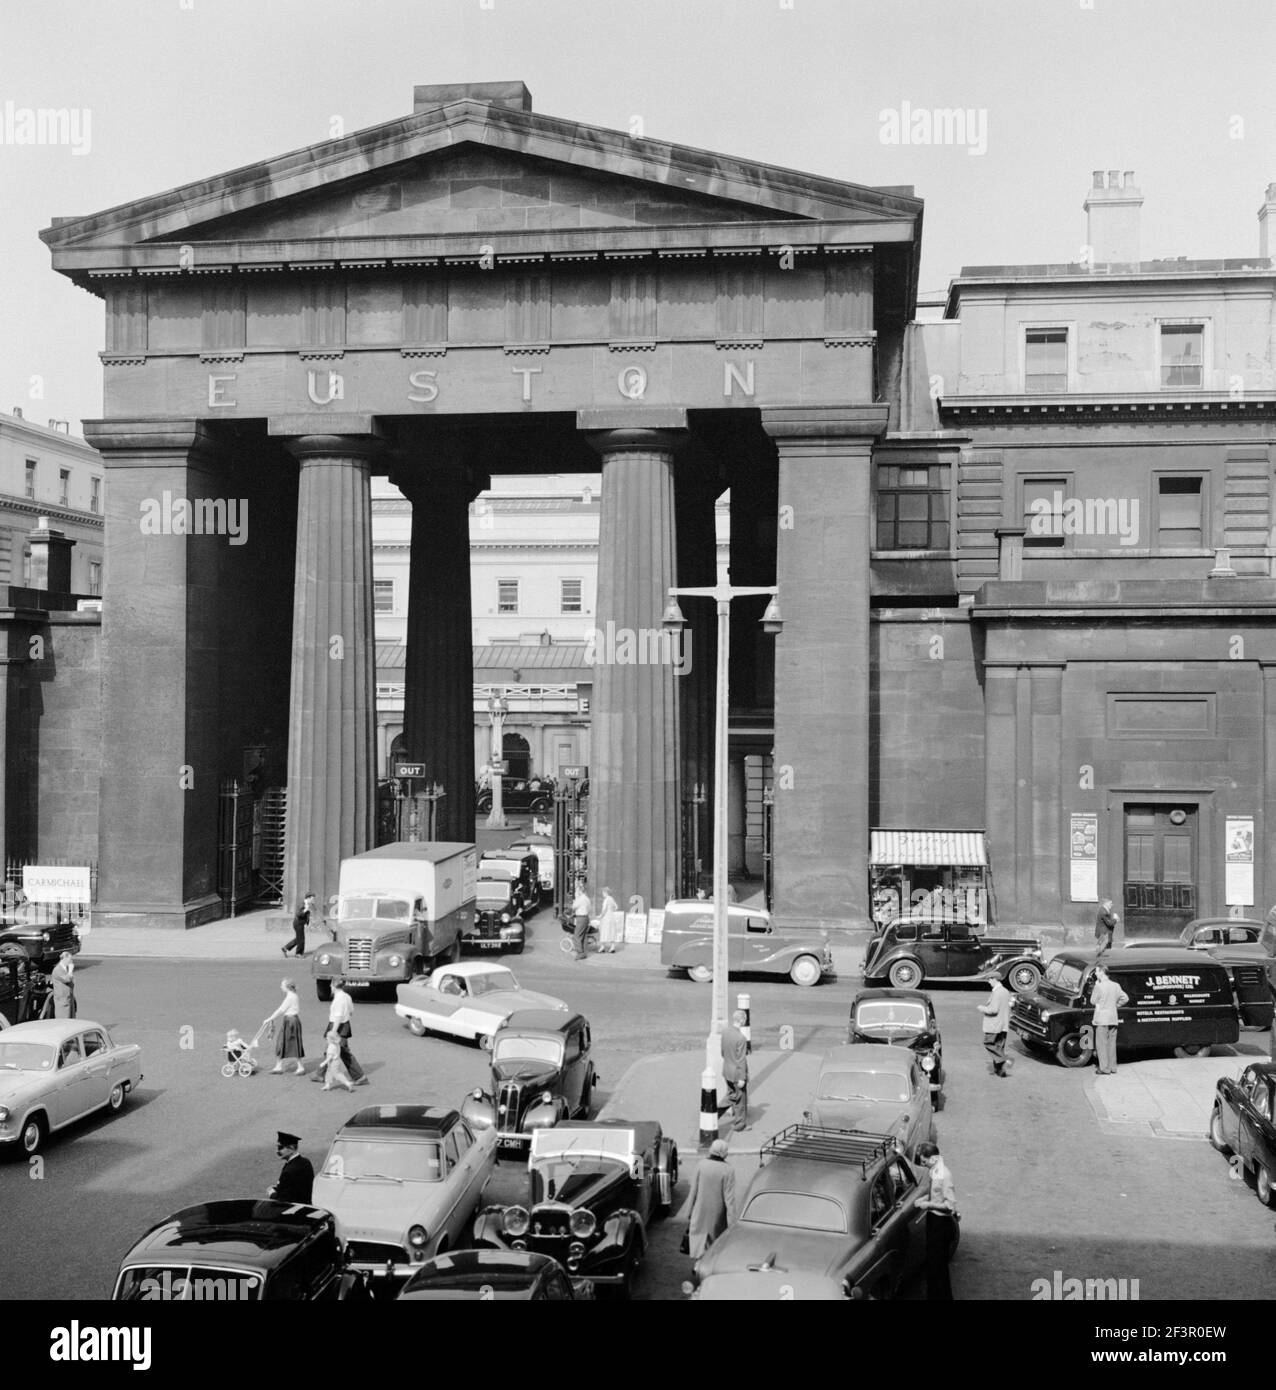 EUSTON ARCH, Euston Station, Euston Road, Camden Town, London. Traffic outside the Euston Arch. The arch was designed by Philip Hardwick in 1837 as pa Stock Photo